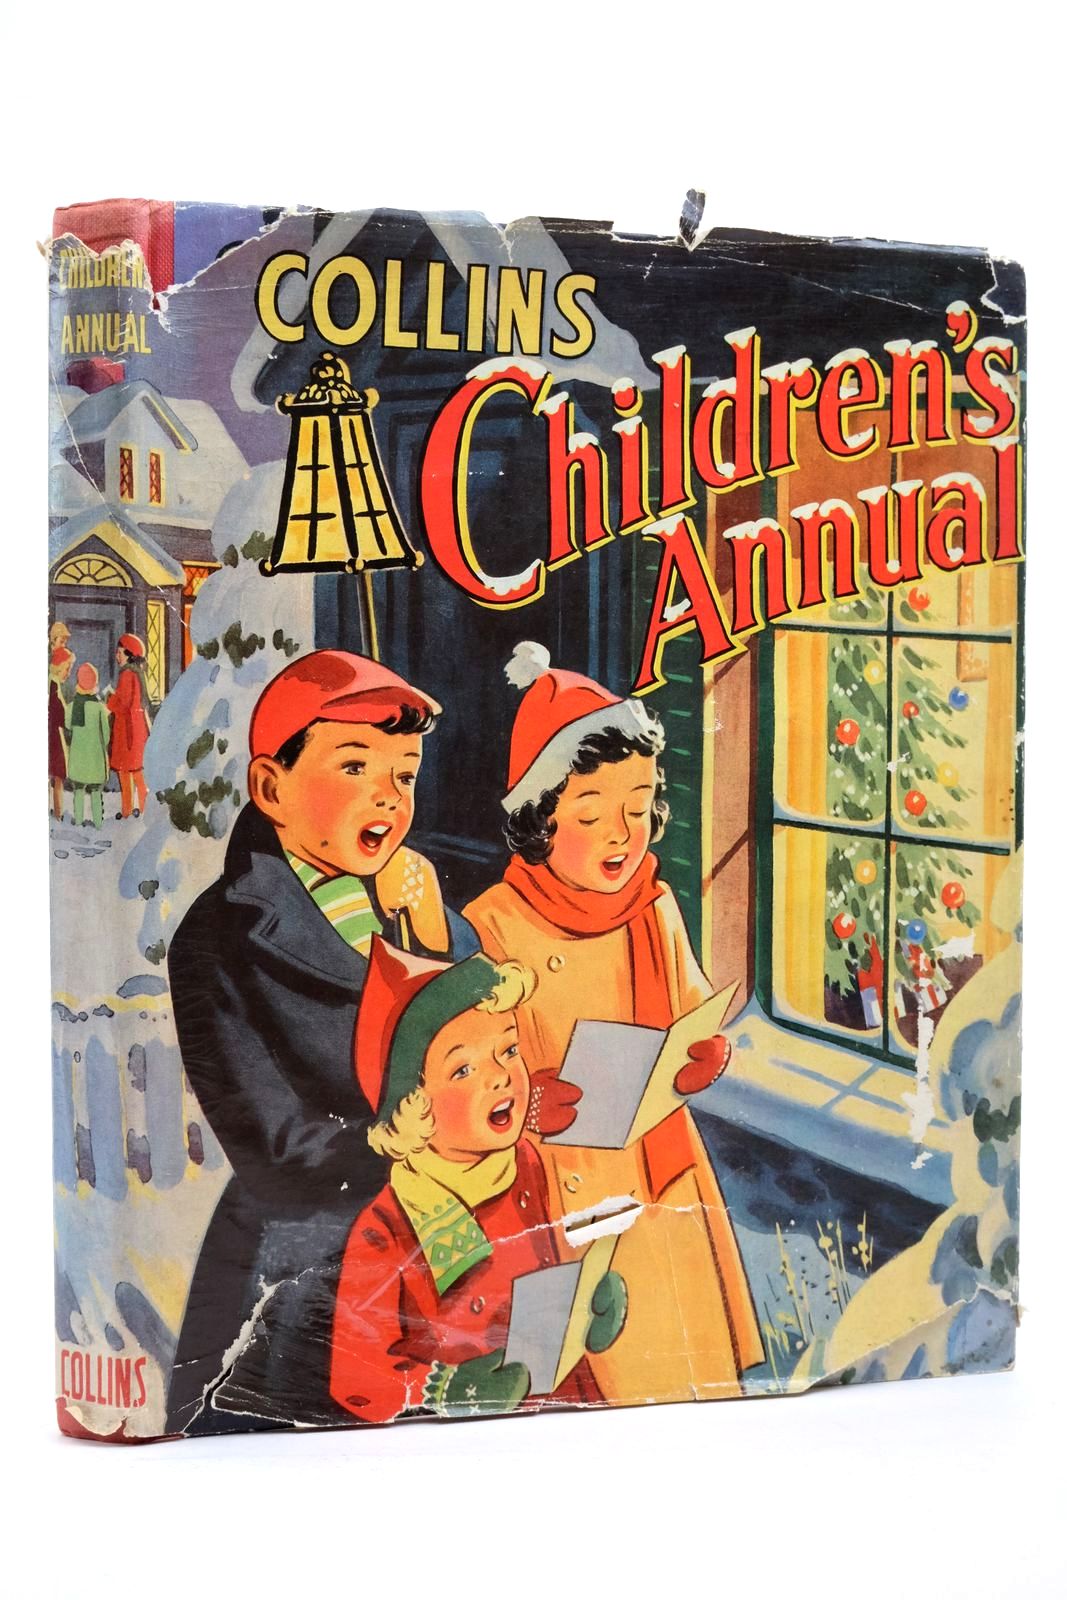 Photo of COLLINS CHILDREN'S ANNUAL written by Clark, Frances B. Shaw, Jane Blake, Molly Helps, Racey et al,  illustrated by Boswell, Hilda Heap, Jean Walmsley McGavin, Hilda Helps, Racey Watson, A.H. et al.,  published by Collins (STOCK CODE: 2138895)  for sale by Stella & Rose's Books